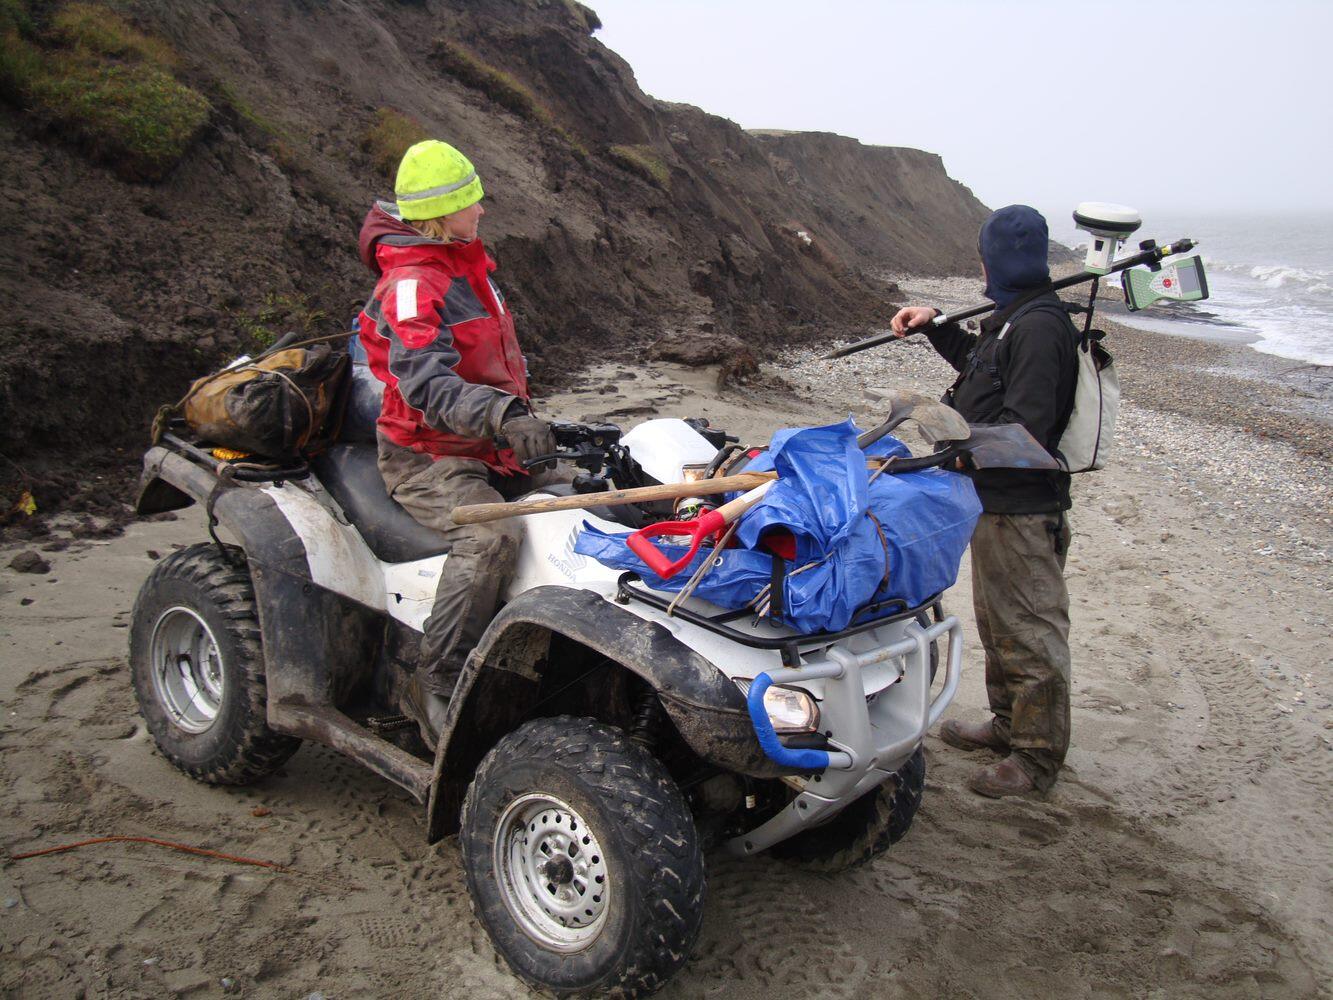 U.S. Geological Survey scientists collecting beach elevation data on an ATV in Alaska